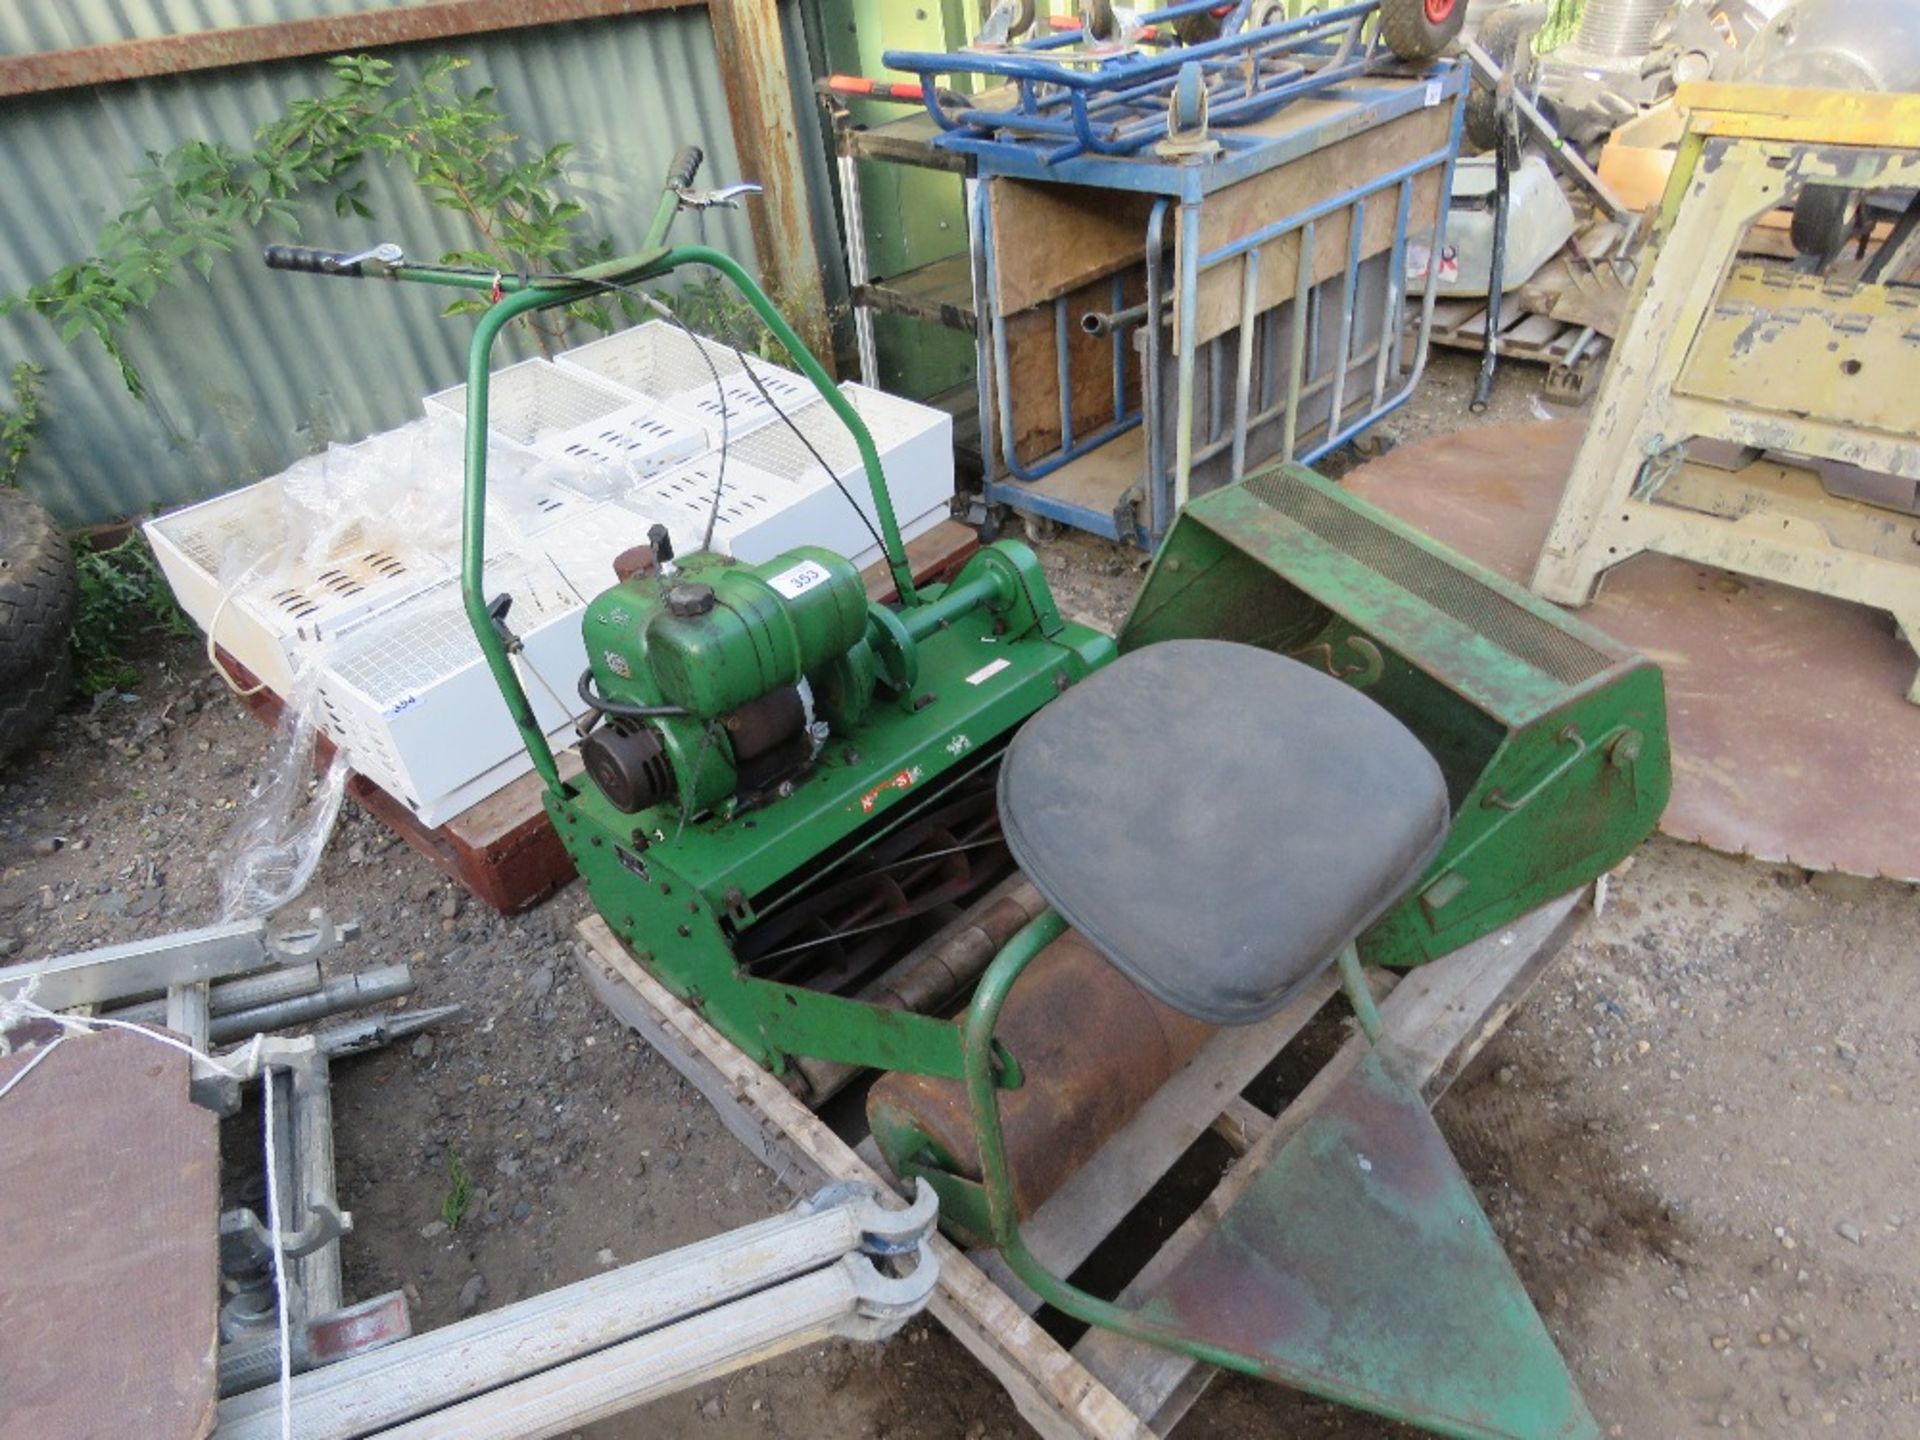 RANSOMES CYLINDER MOWER PLUS ROLLER SEAT AND BOX. THIS LOT IS SOLD UNDER THE AUCTIONEERS MARGIN S